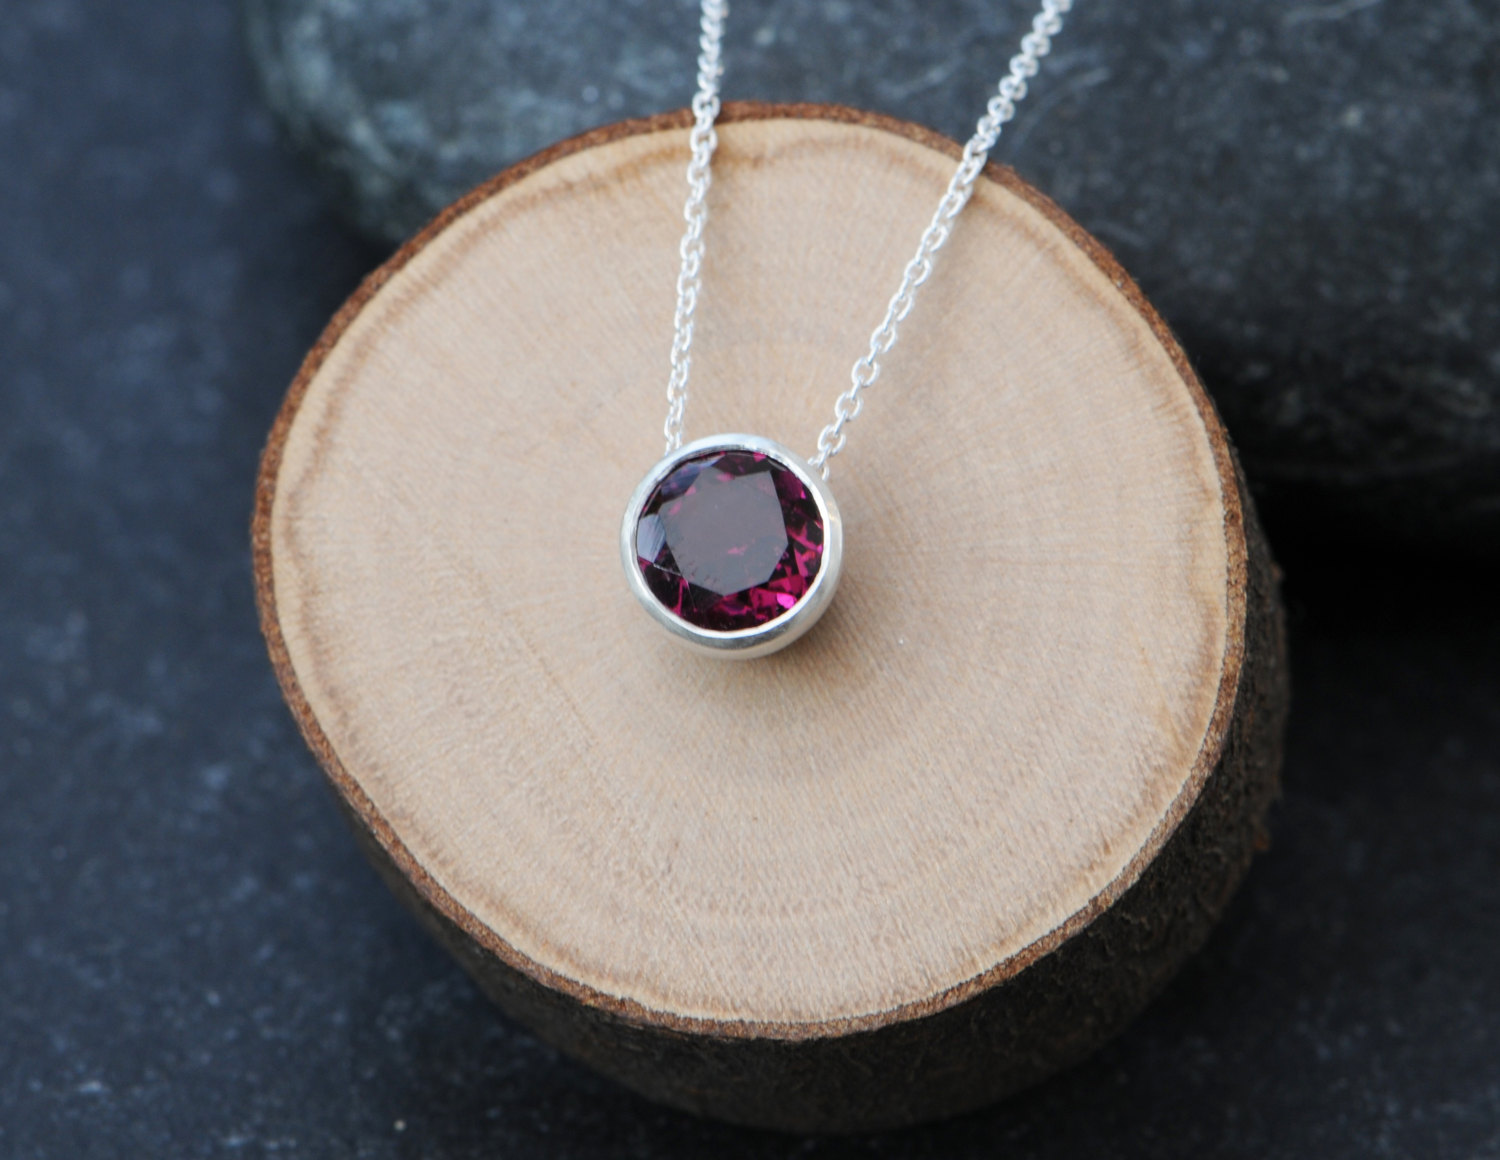 Lovely deep pink rhodolite garnet, set in satin finished sterling silver pendant. Clean and simple designed and handmade by William White in Cornwall, UK.